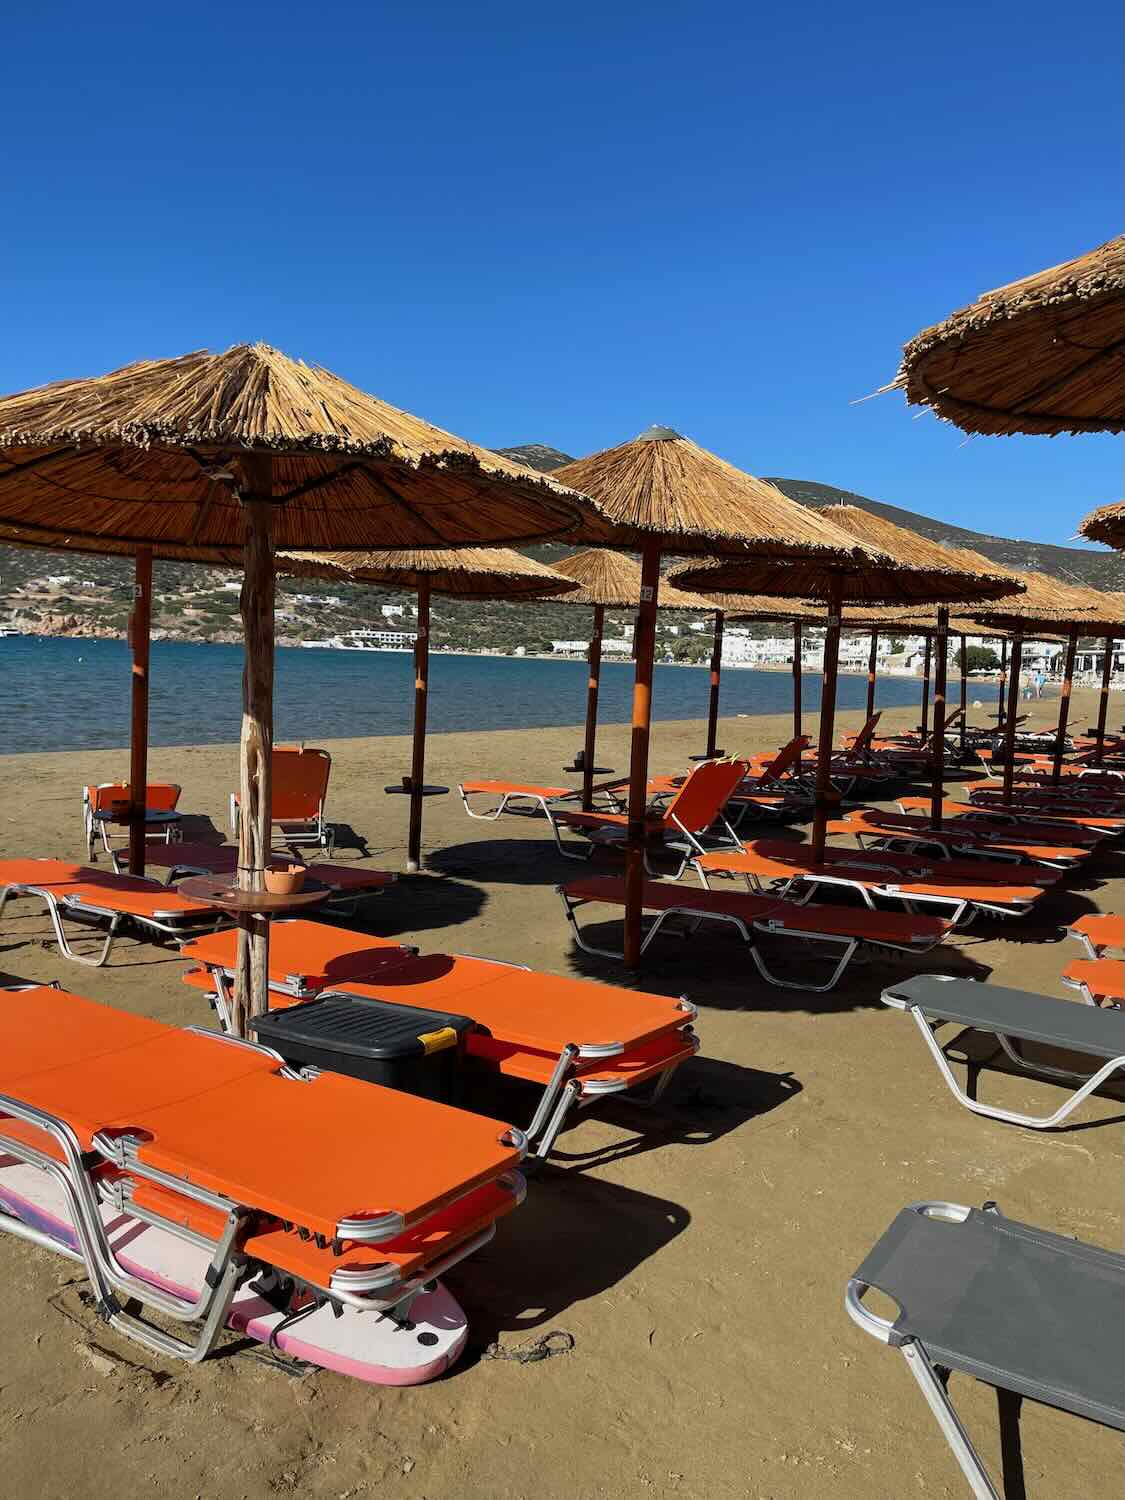 Orange sunbeds and natural straw umbrellas line the sandy shore of Sifnos, inviting relaxation on a sunny day, a serene addition to any Sifnos itinerary.